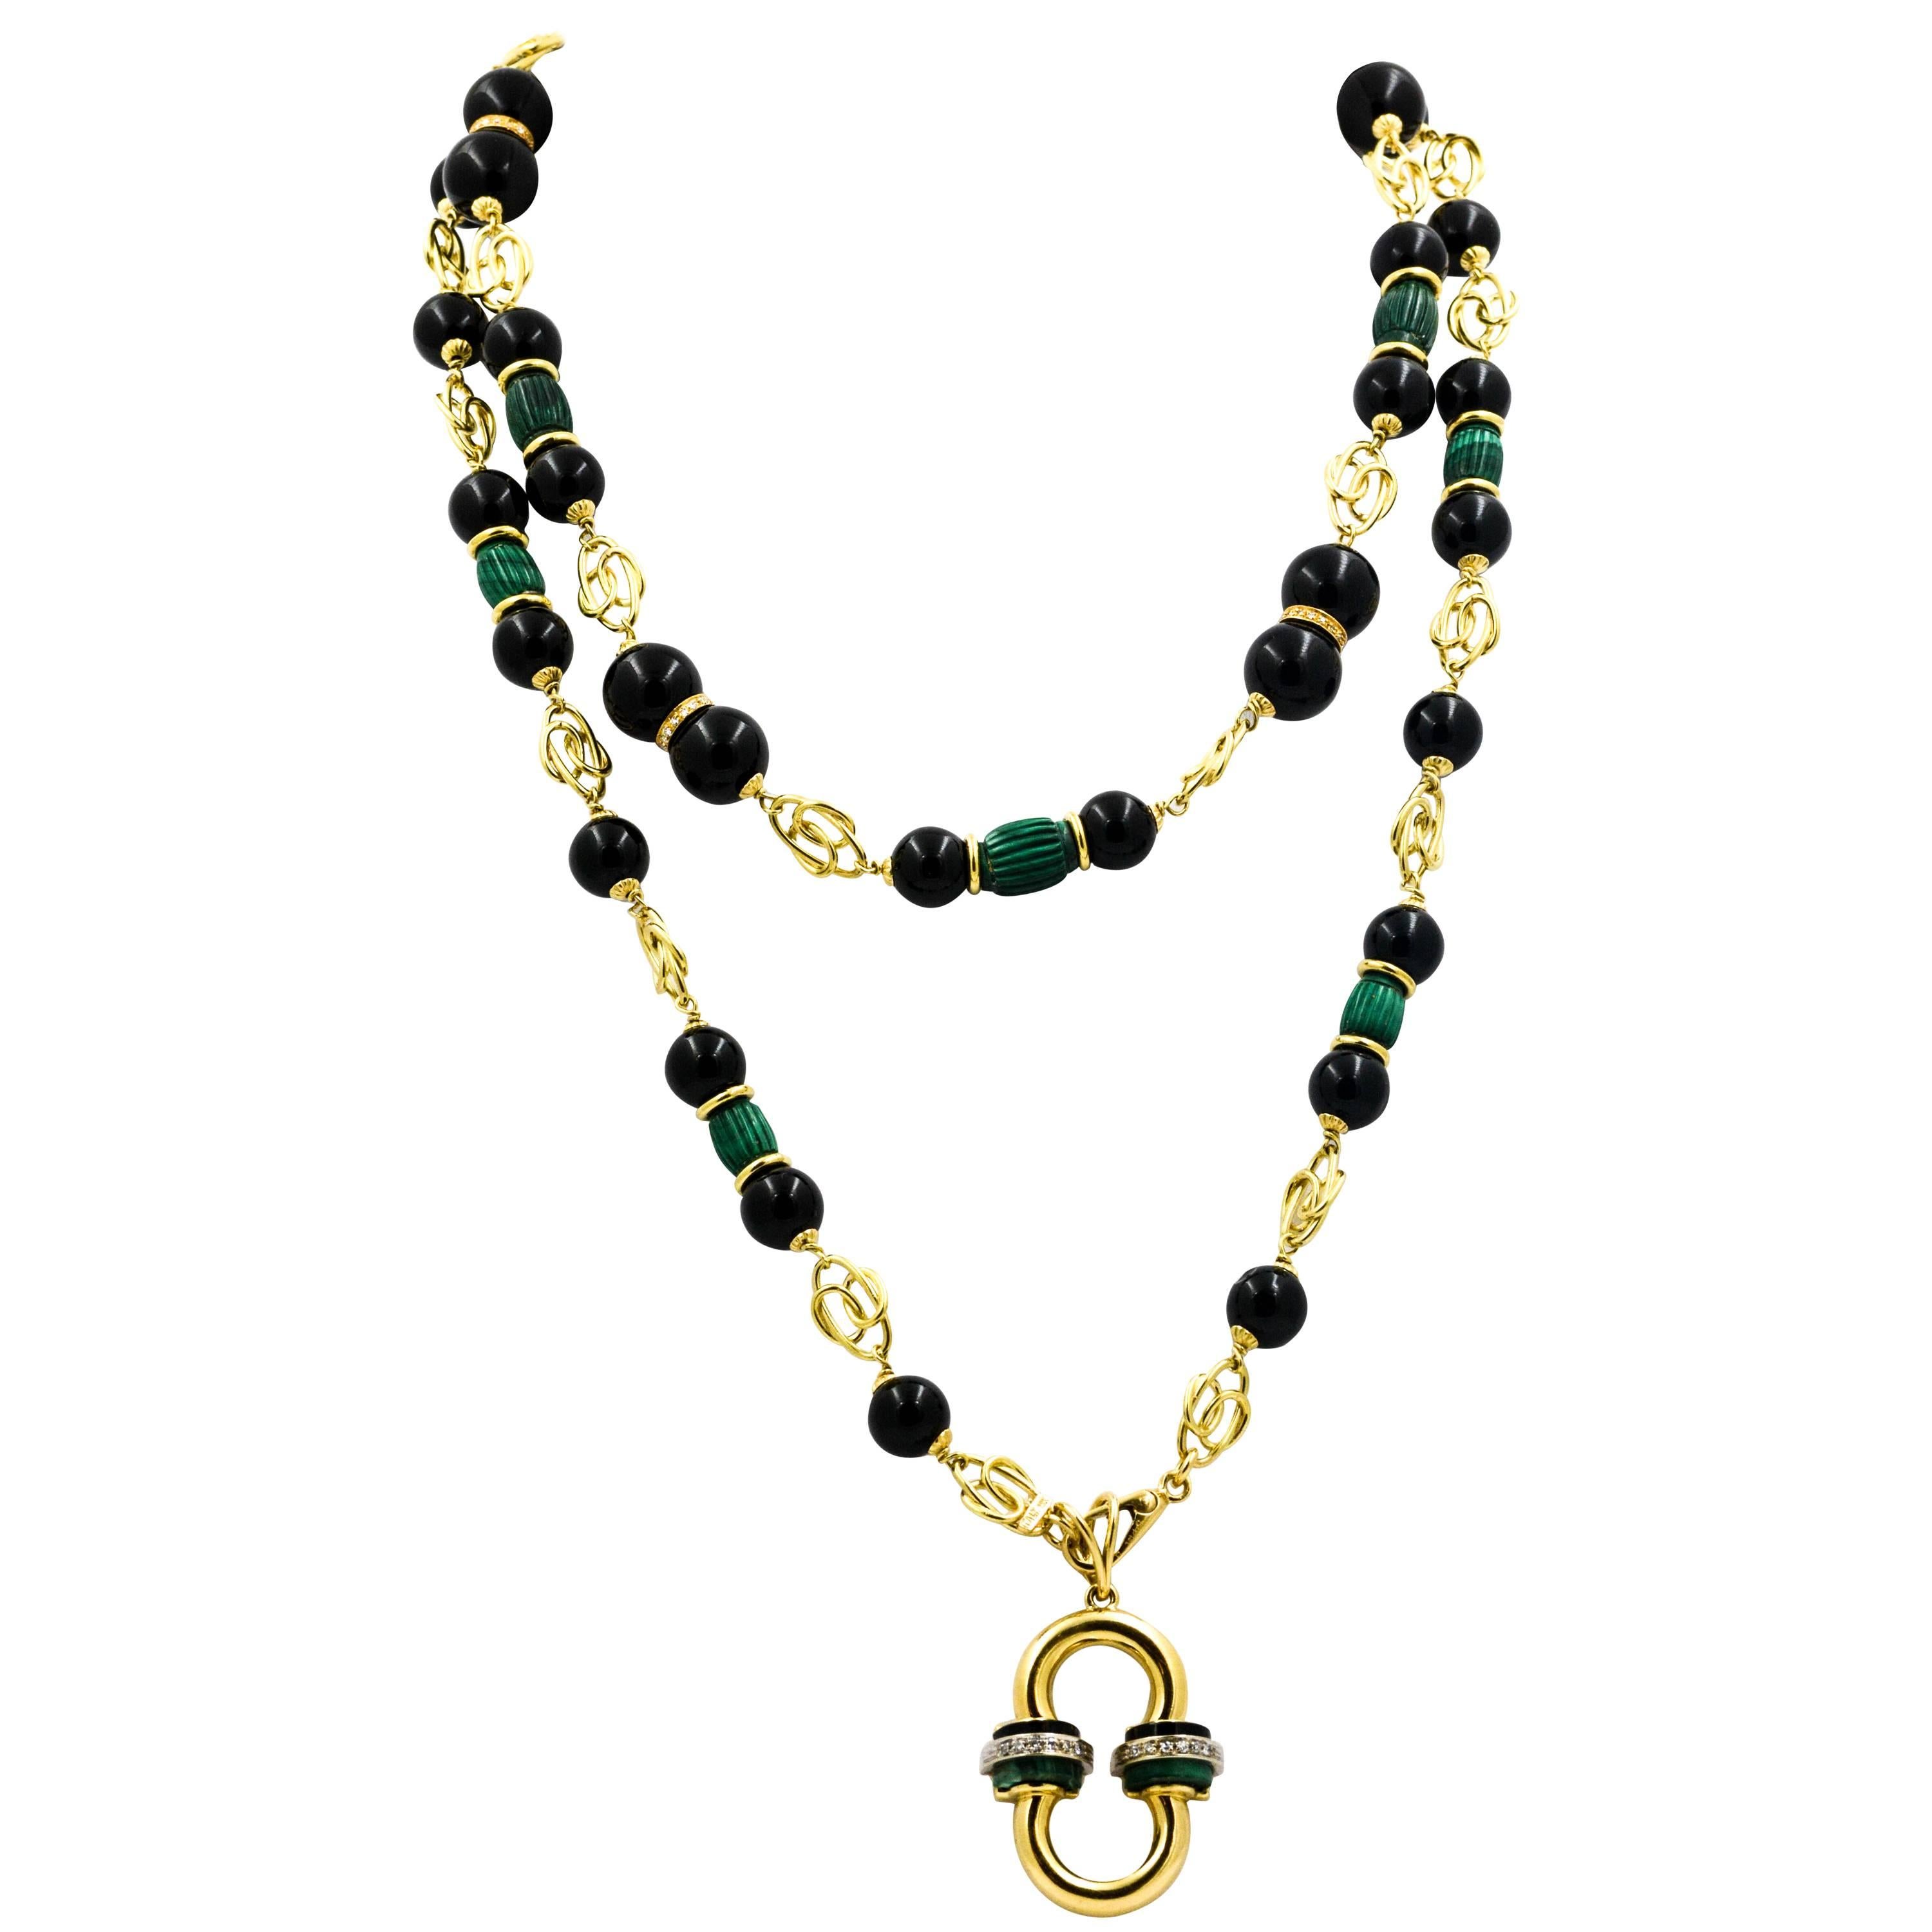 A dramatic gold pendant of diamond roundels hang from this amazing 18kt Yellow gold necklace. The necklace and pendant feature vibrant green malachite accented by beautifully contrasting onyx.  Both the malachite and onyx are accented by diamond